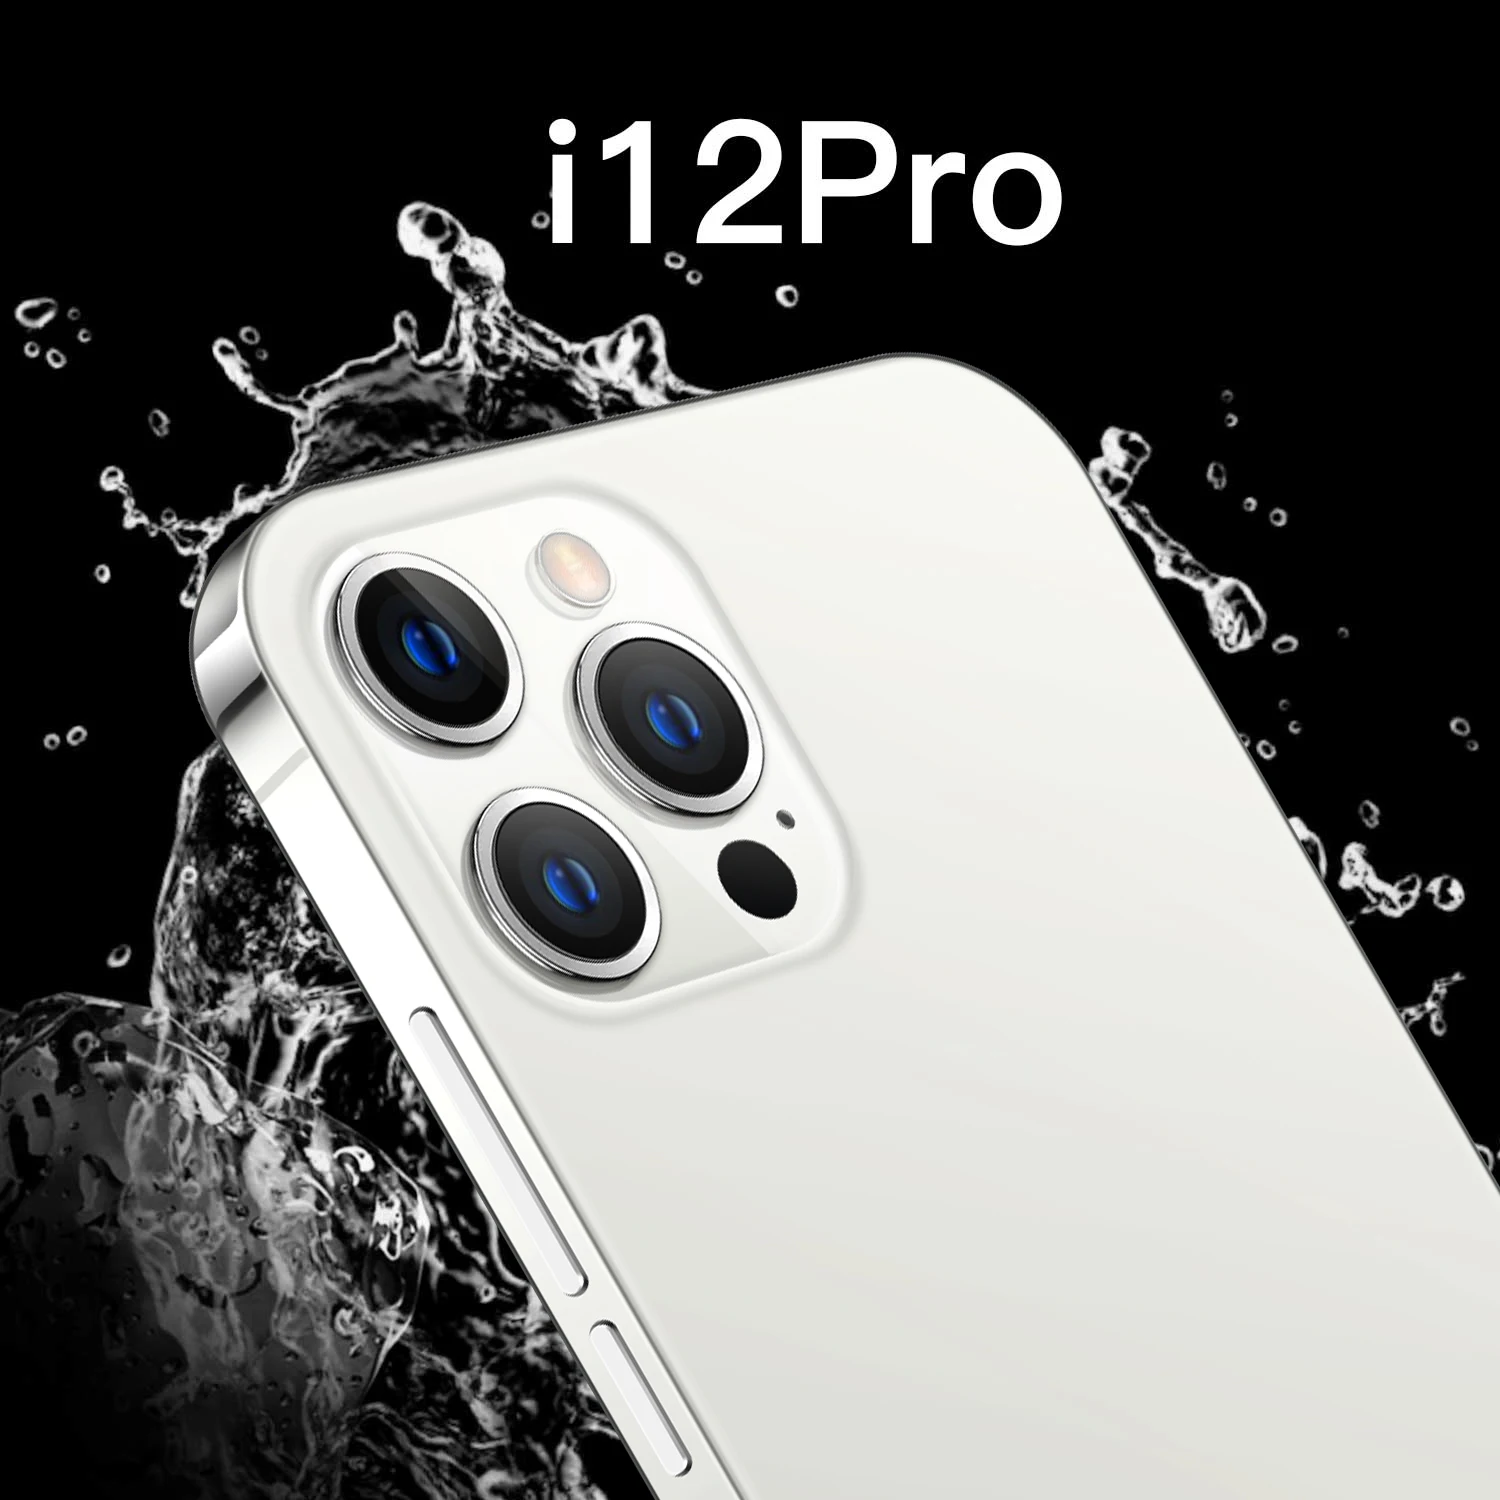 

Global version PHONE12 PRO MAX 12GB+512GB 6.7 Inch full Display Android 10.0 Mobile Phone I12 Unlocked Cell Phone Smartphone